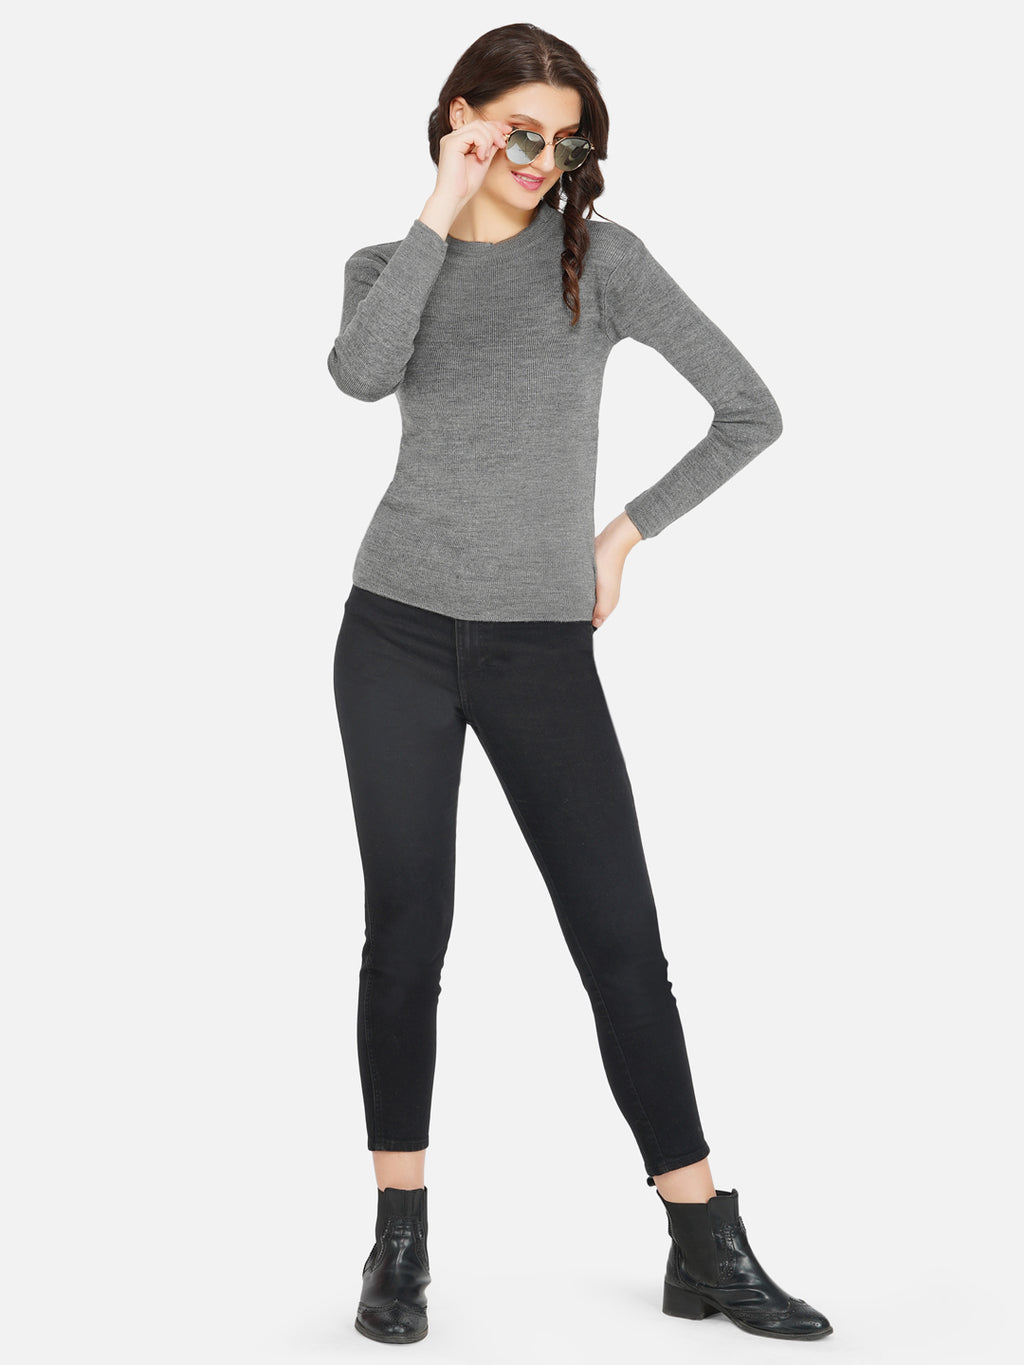 Fabnest winter acrylic grey round neck knitted sweater-Sweaters-Fabnest